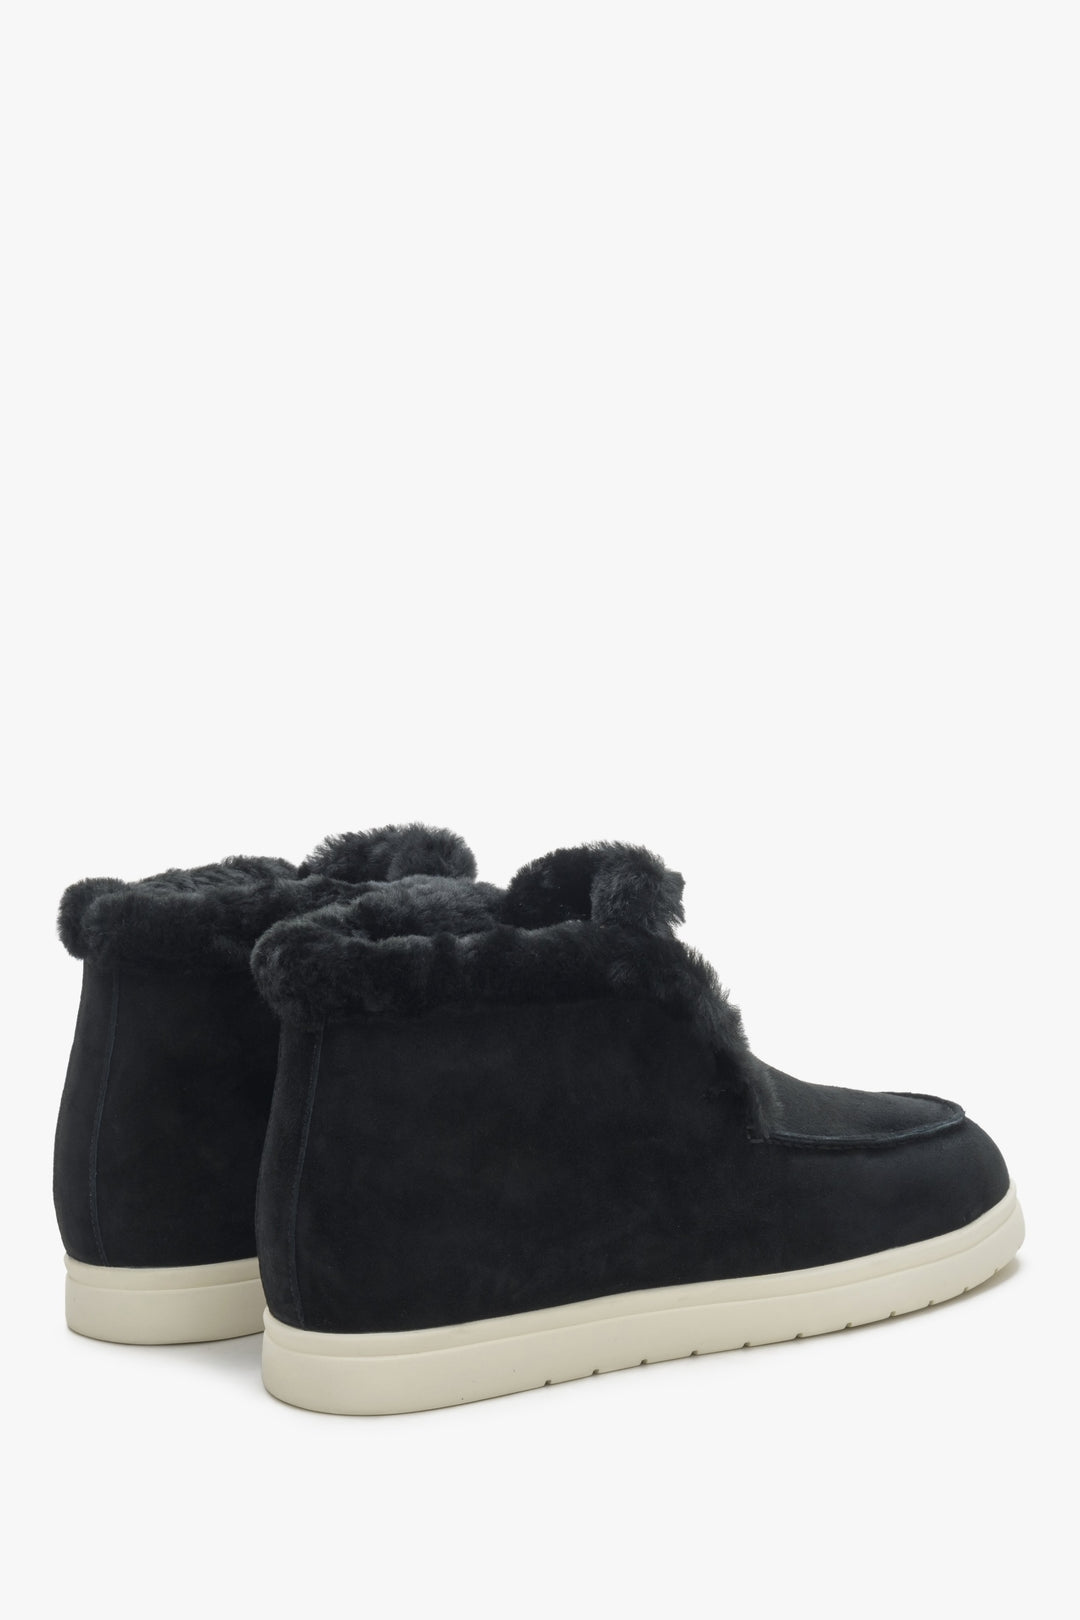 Slip on low-top boots in black colour made of velour and fur.